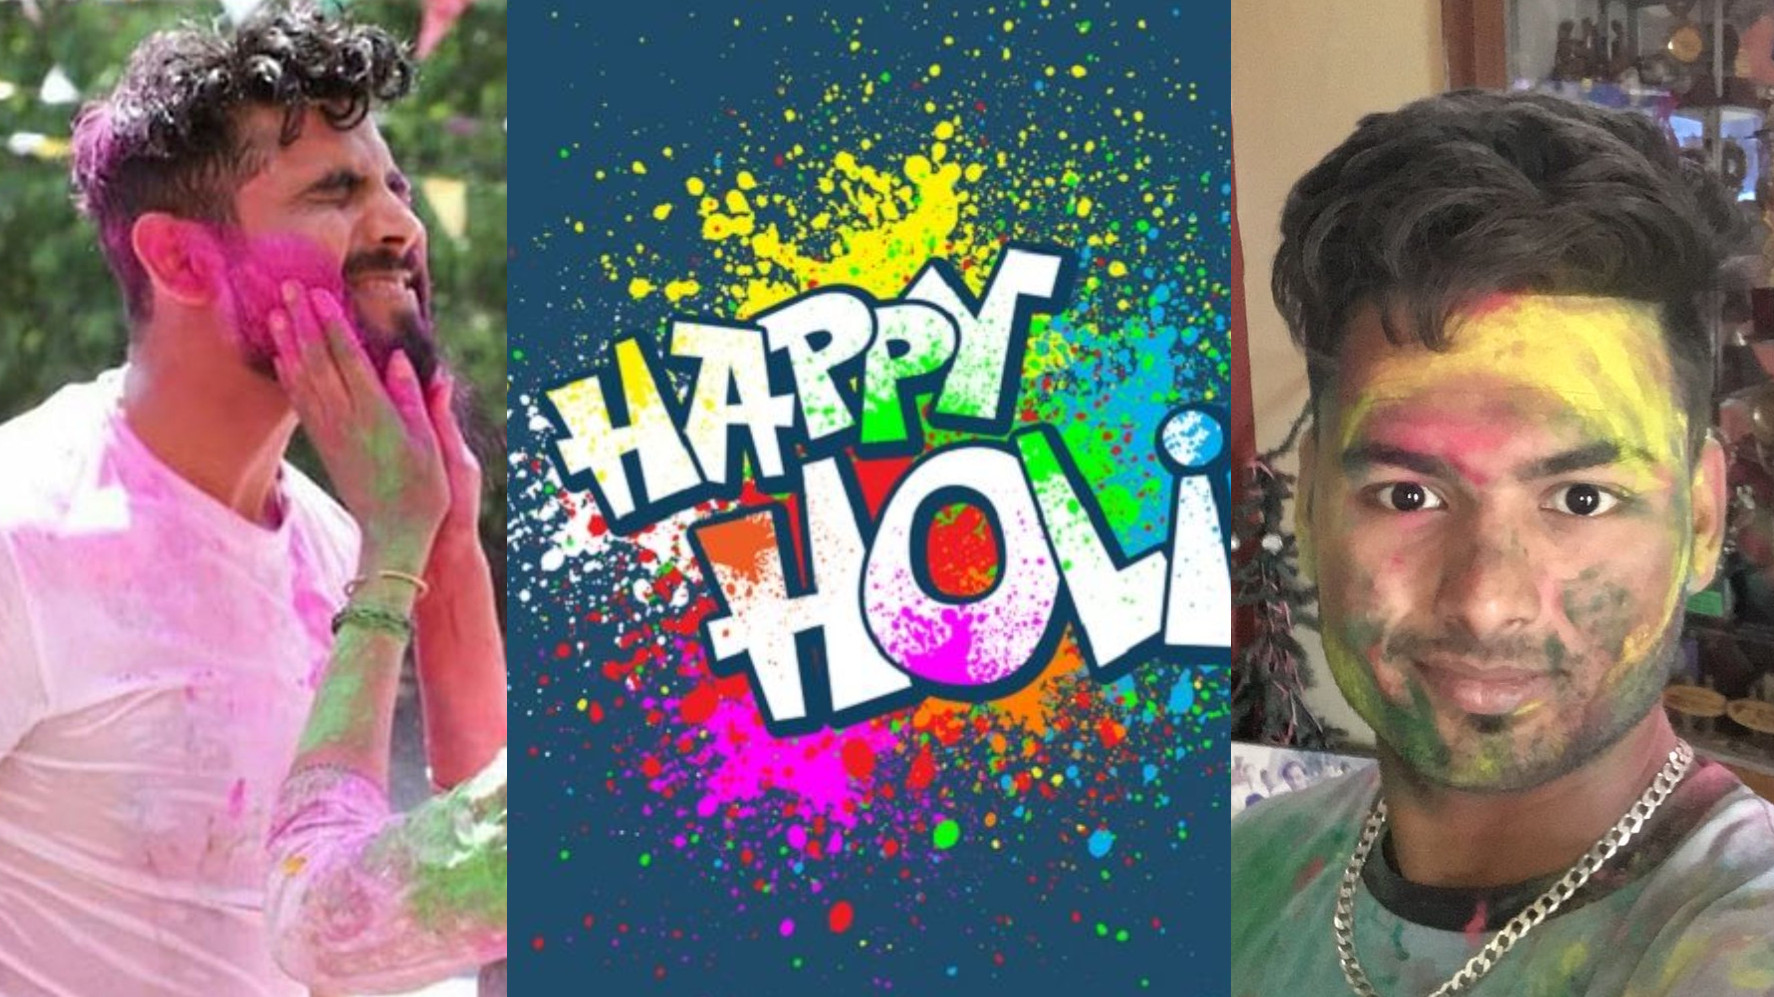 India cricket fraternity wishes the fans on the festival of colors, Holi  